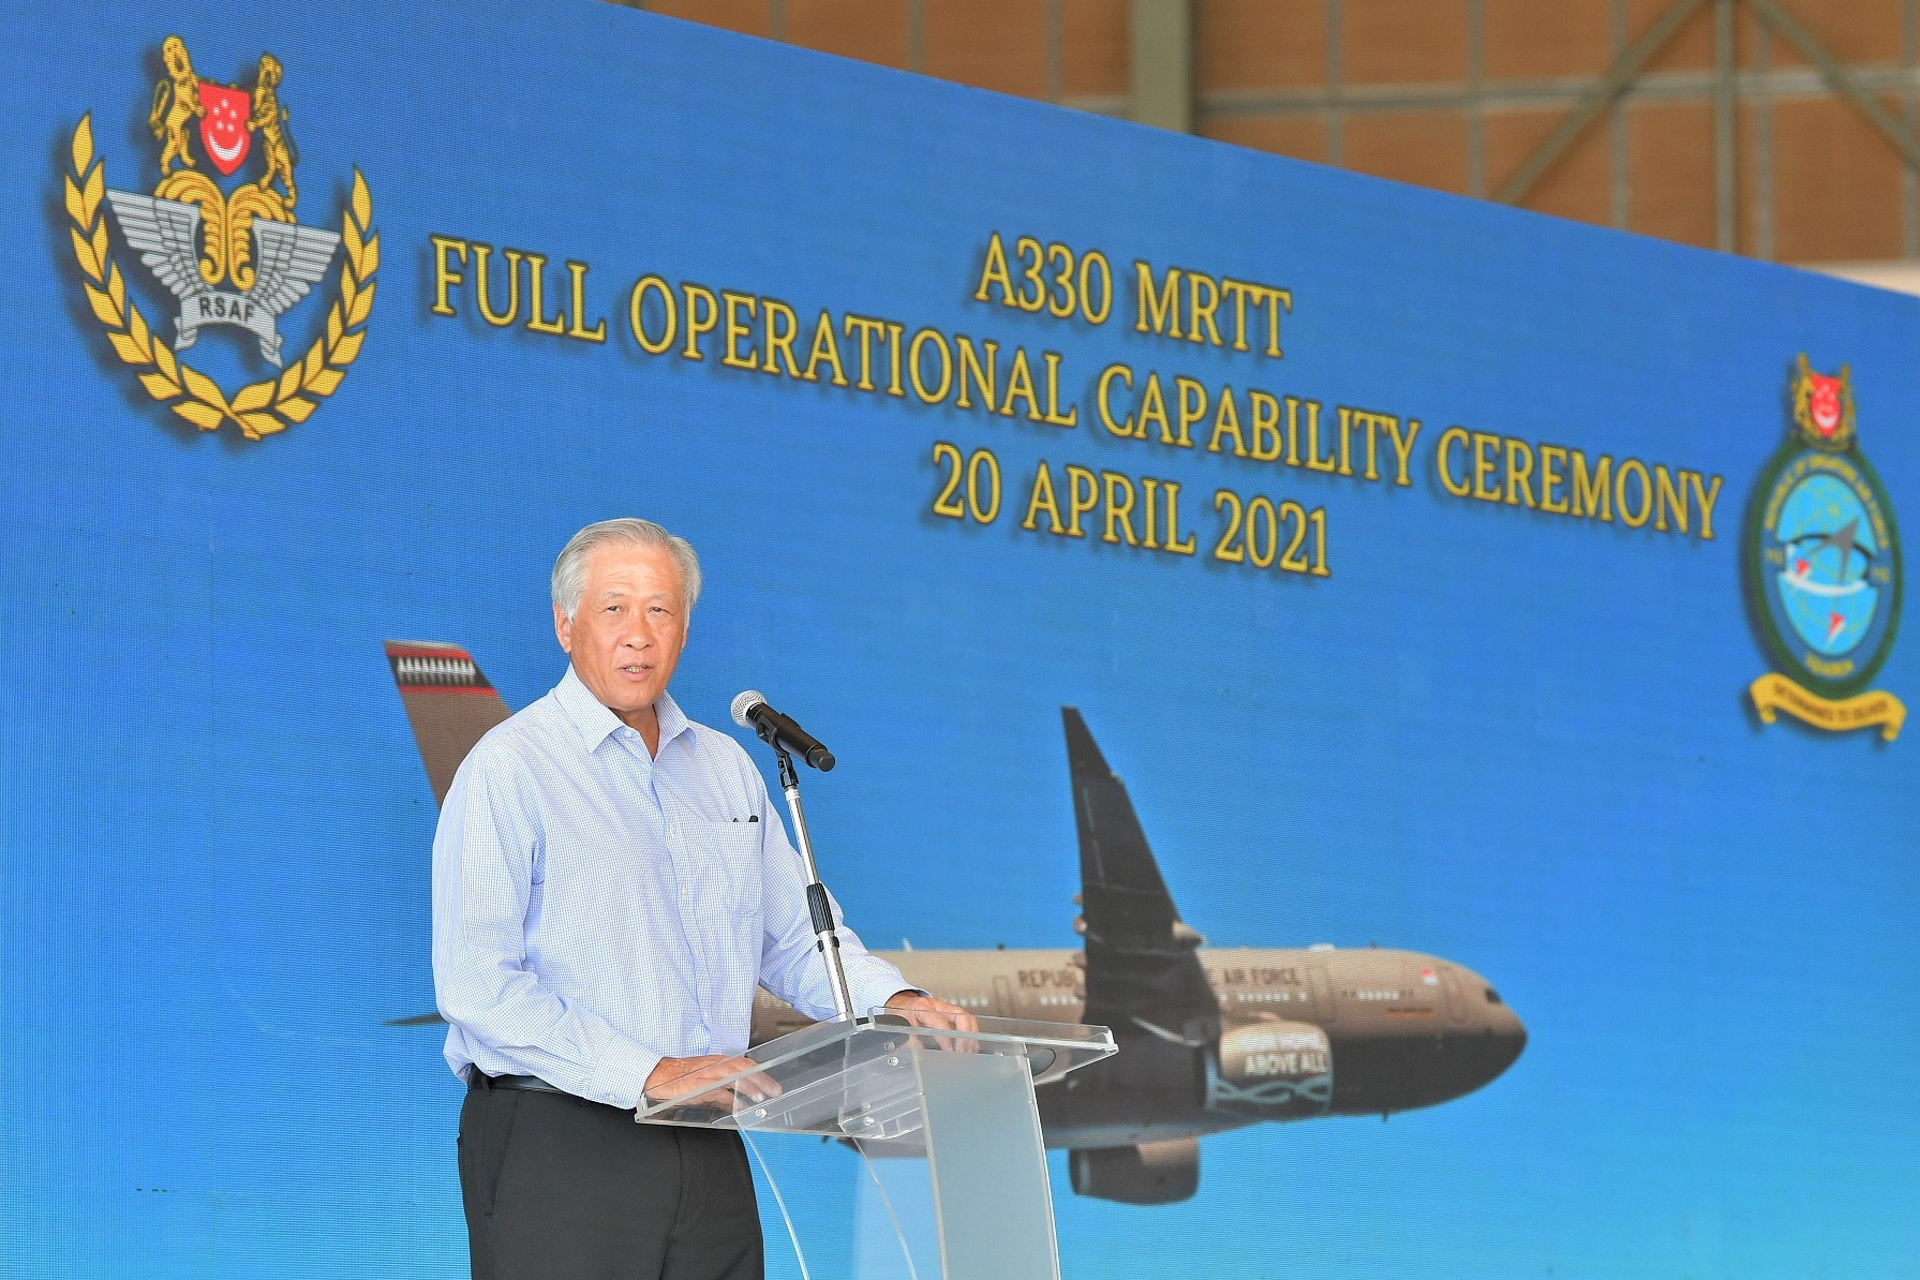 Republic of Singapore Air Force's A330 MRTT Tanker Aircraft Attains Full Operational Capability